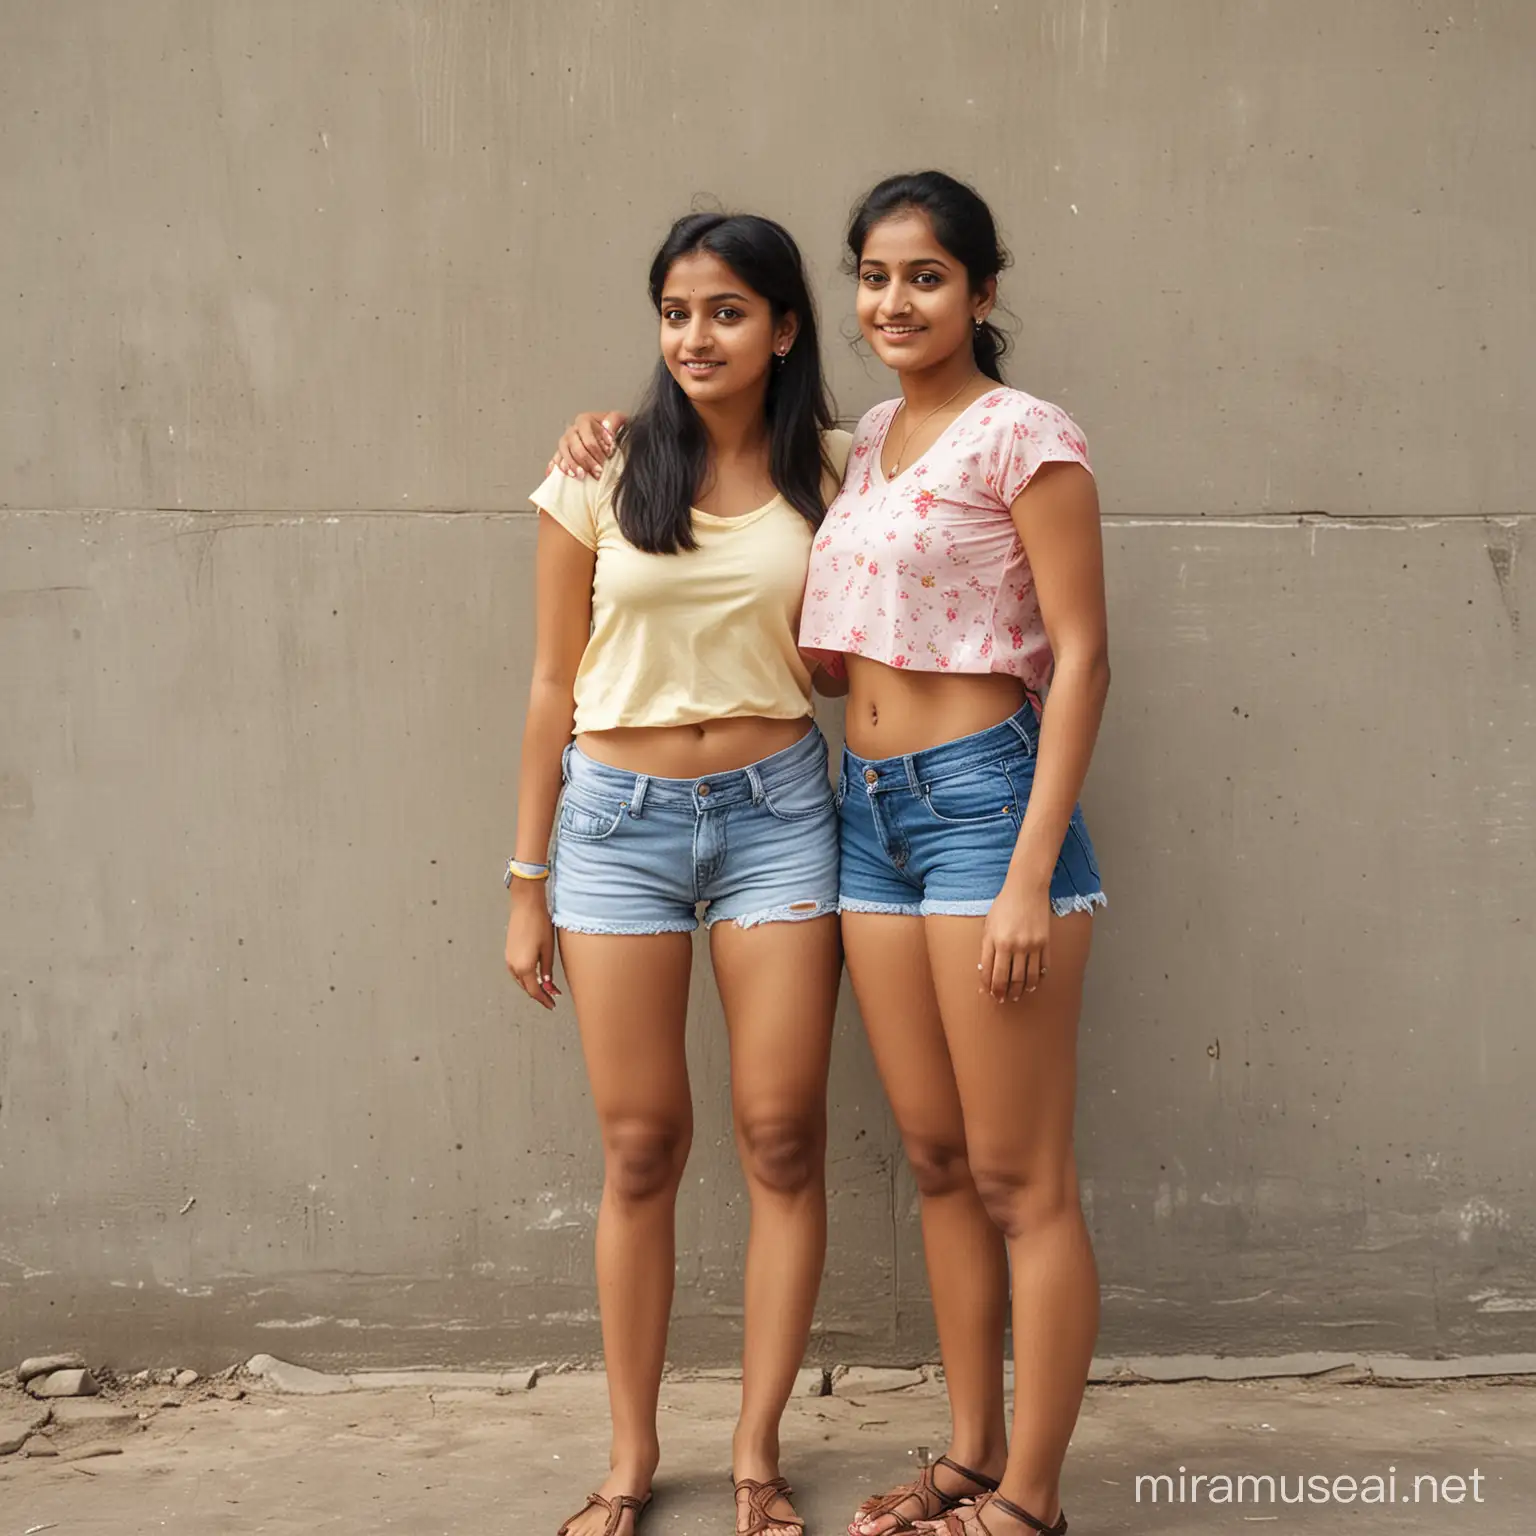 Two Indian Girls Enjoying a Sunny Day Outdoors